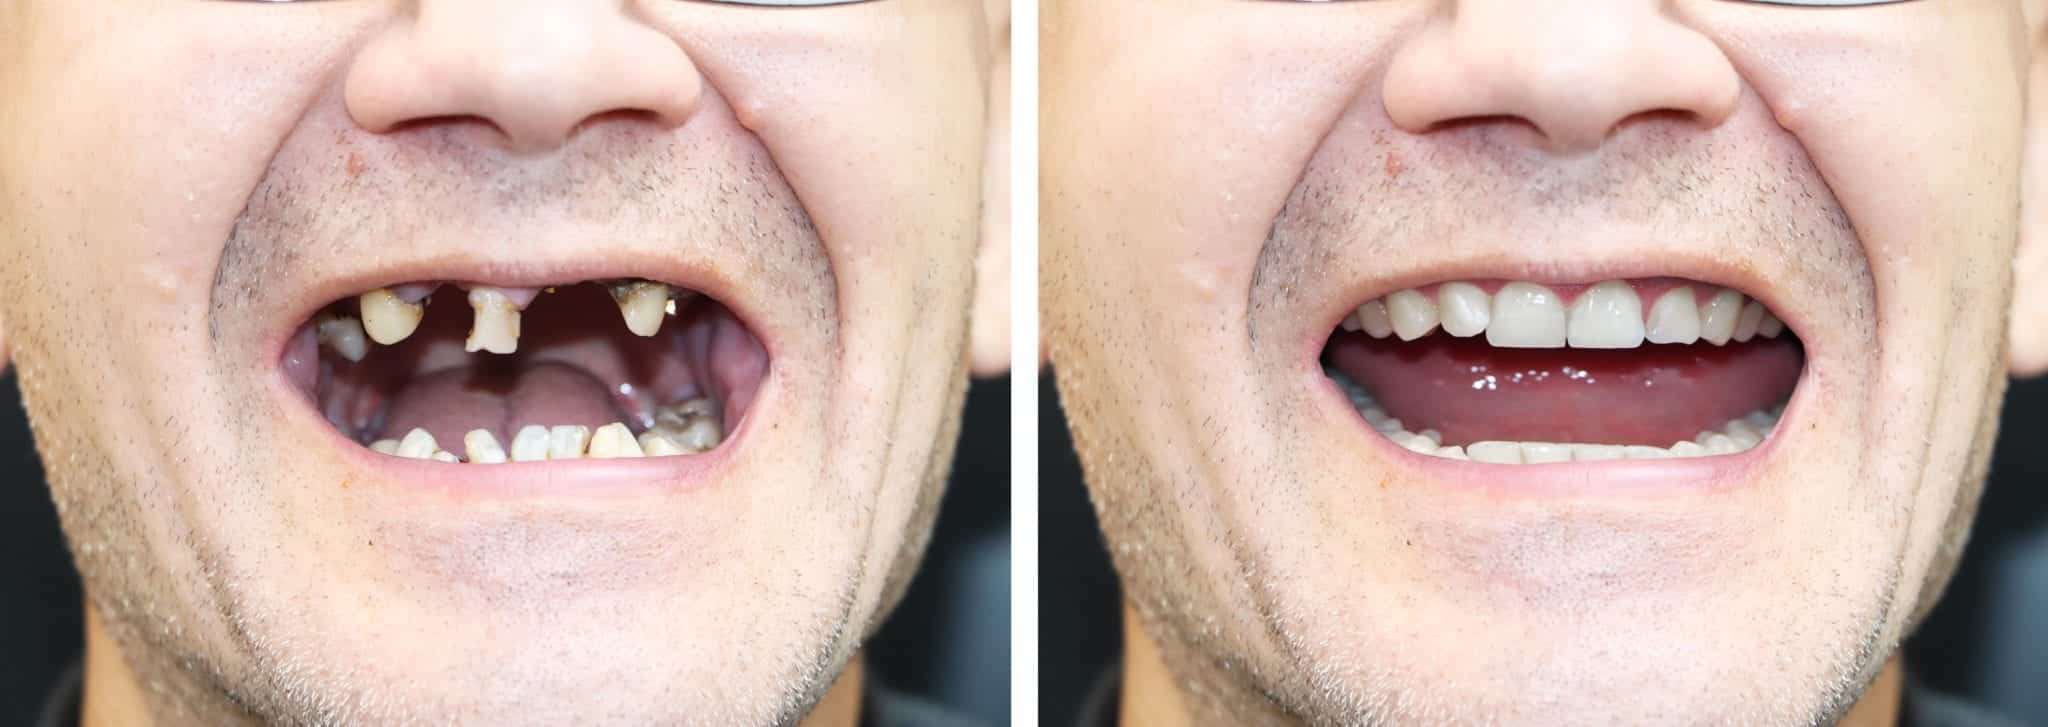 Before and after of a full mouth reconstruction